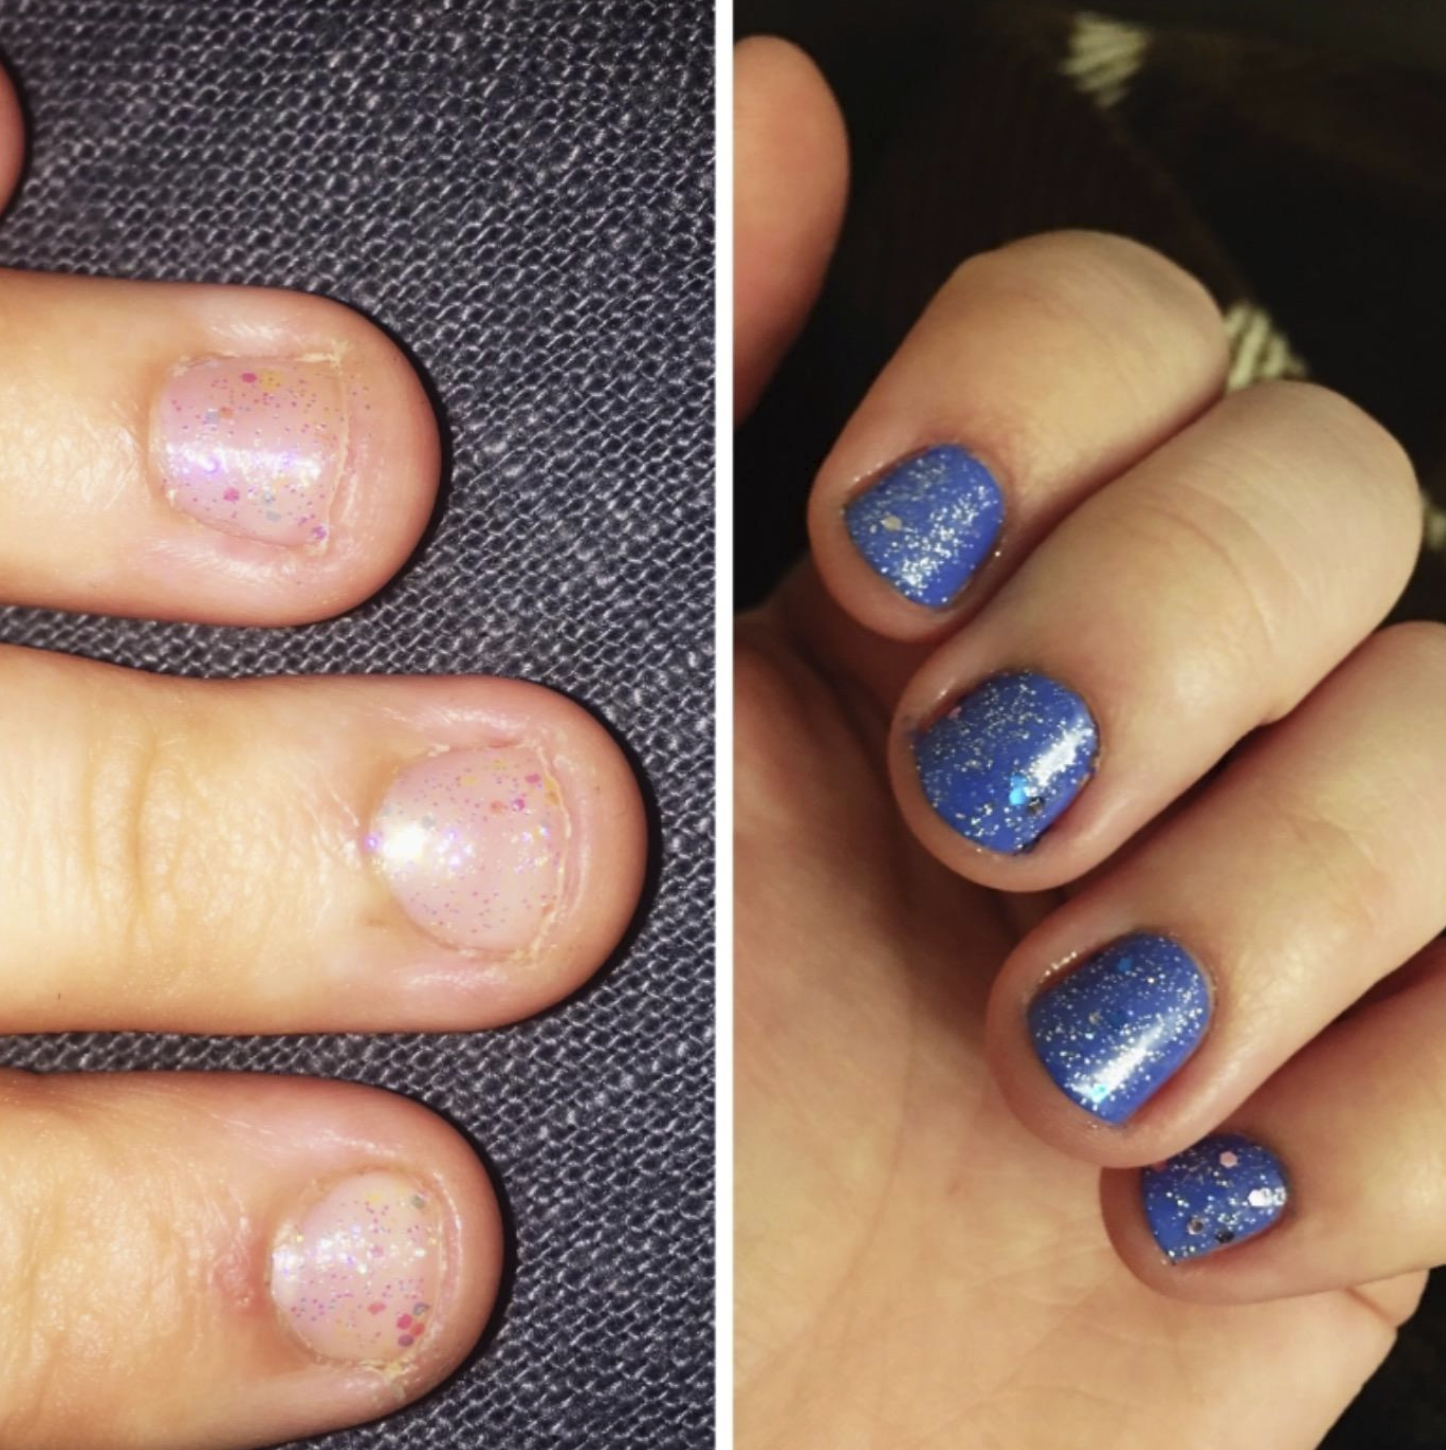 A reviewer&#x27;s before-and-after showing nails bitten to the nail bed and another photo of them having grown considerably 